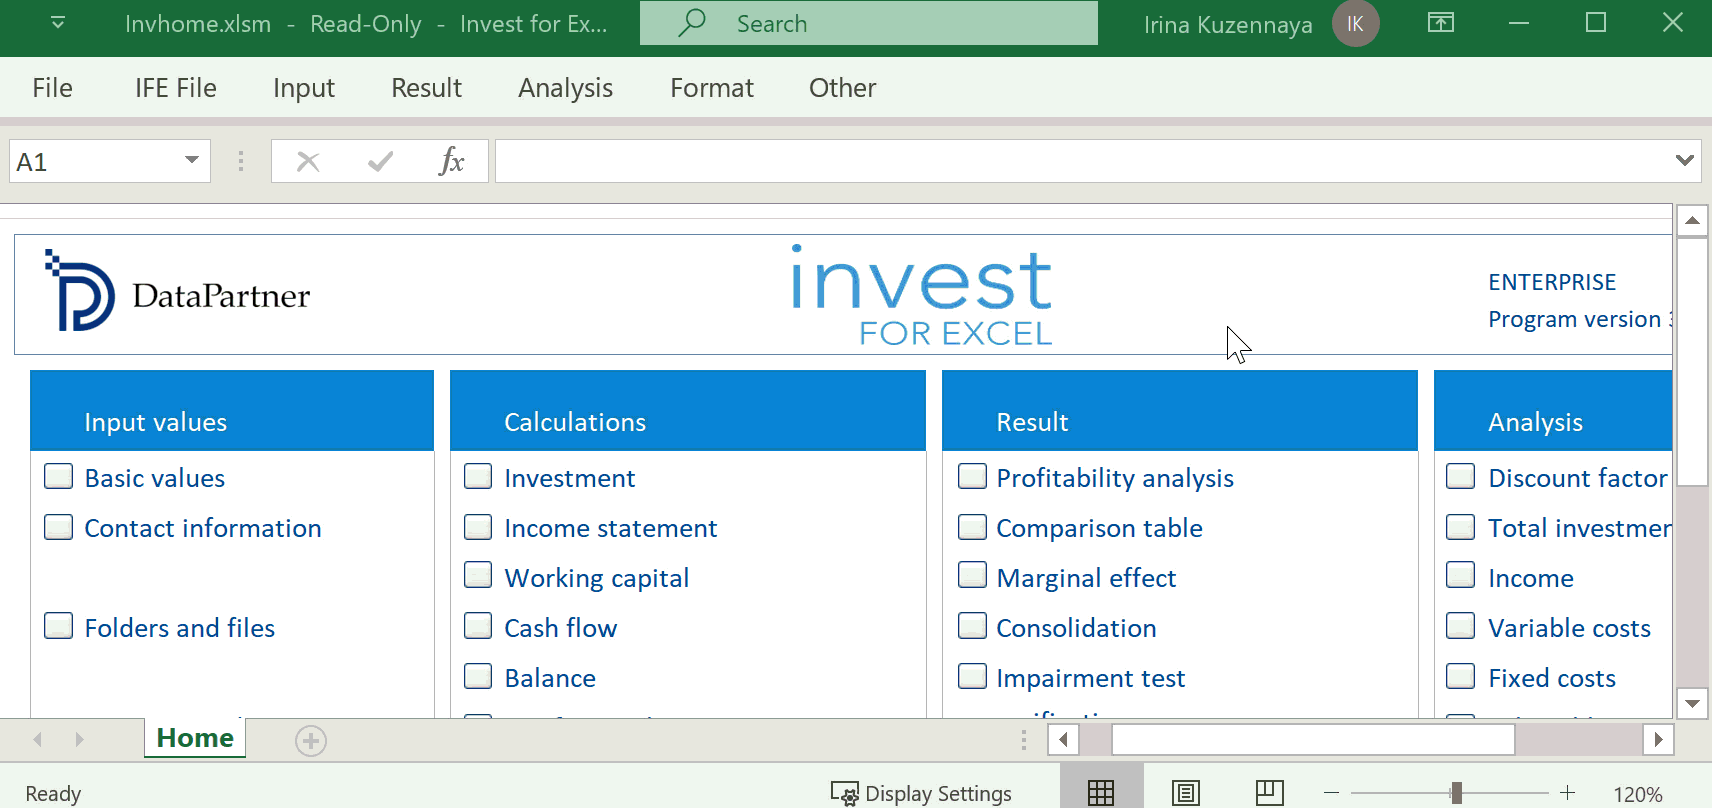 Invest for Excel: how to change the defaults